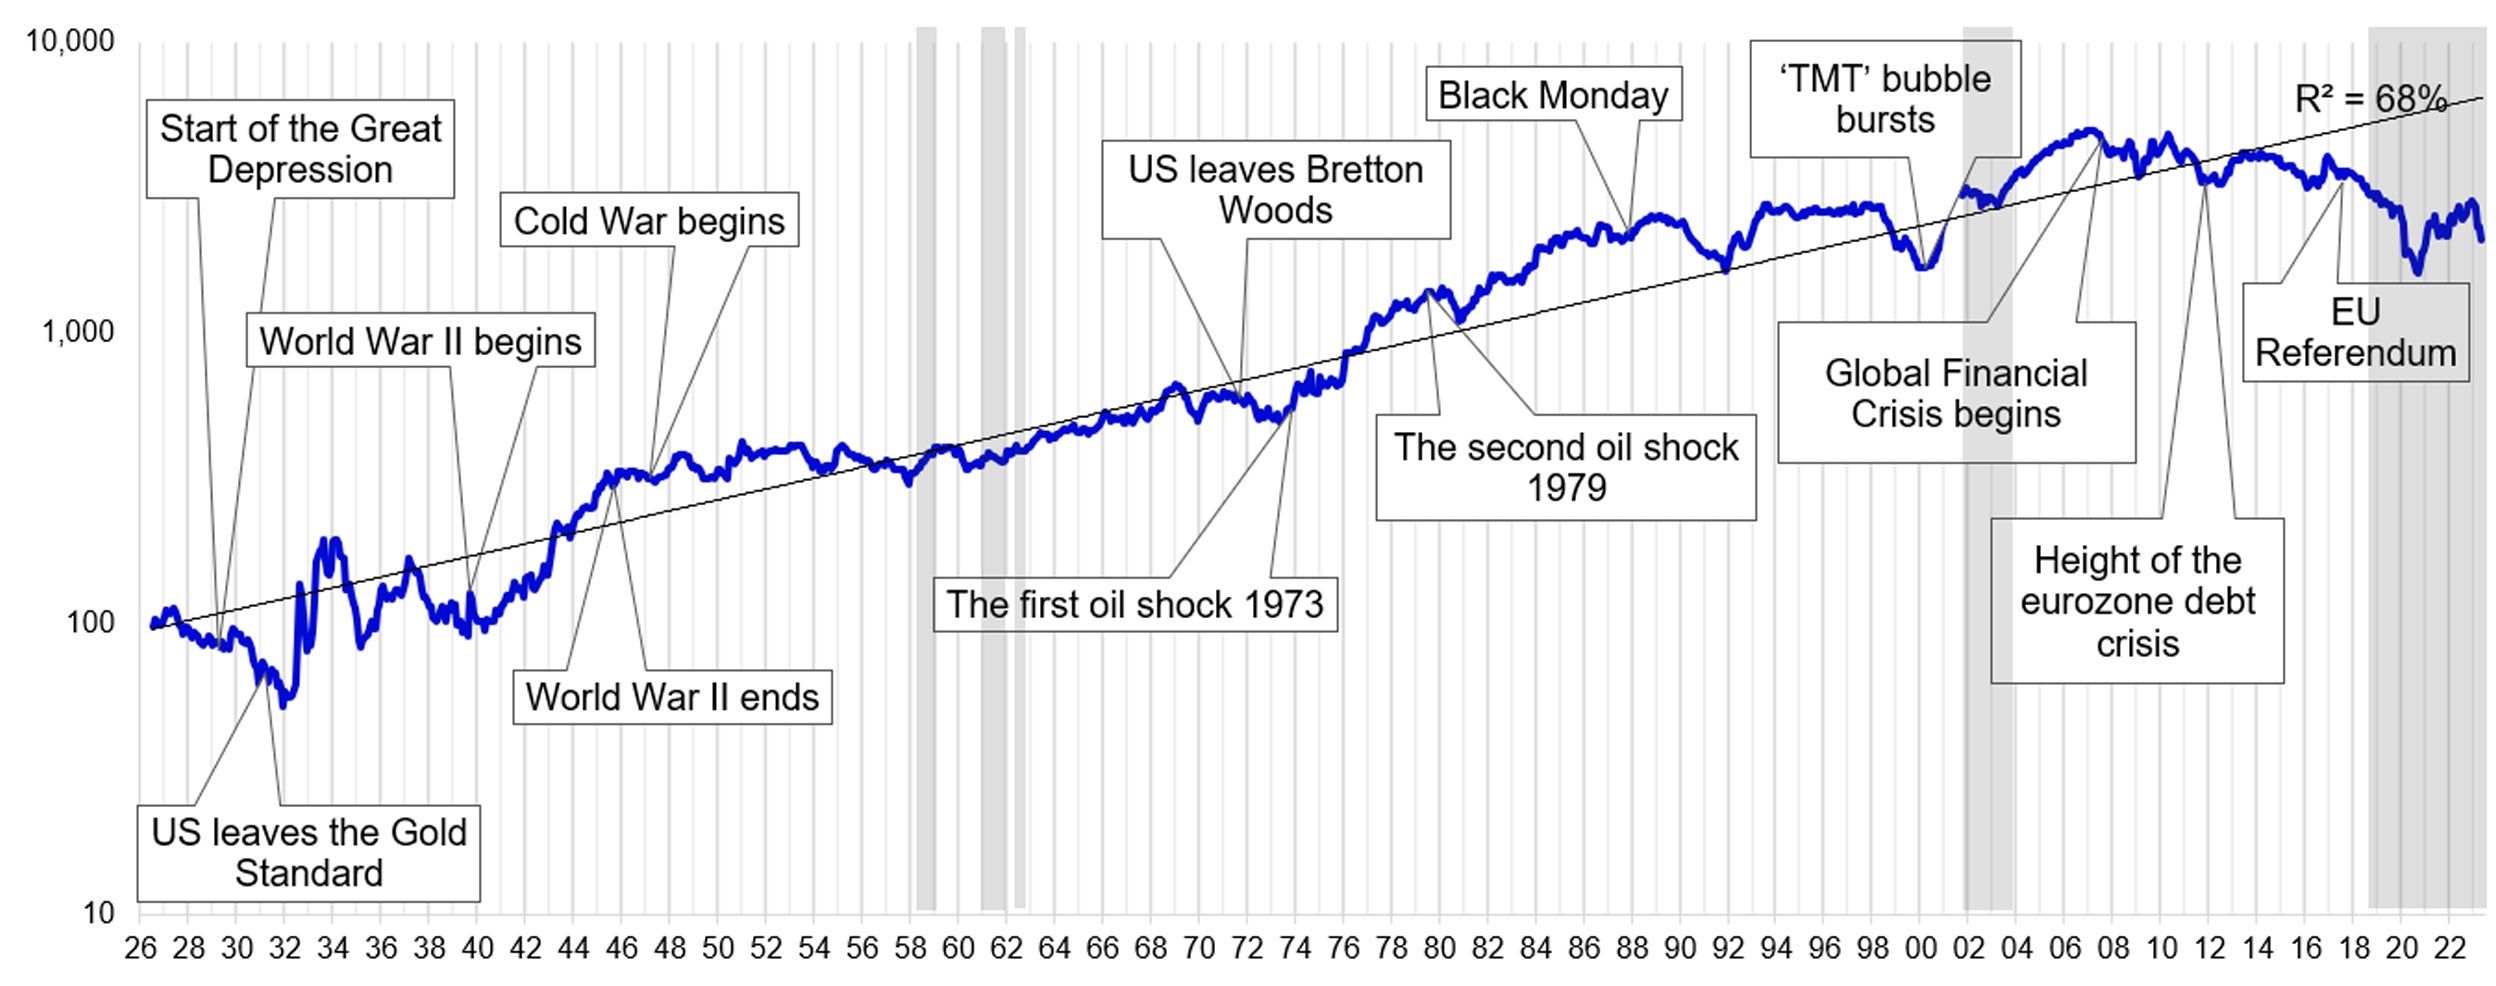 Long Term Relative Performance of US Equities – the importance of valuation